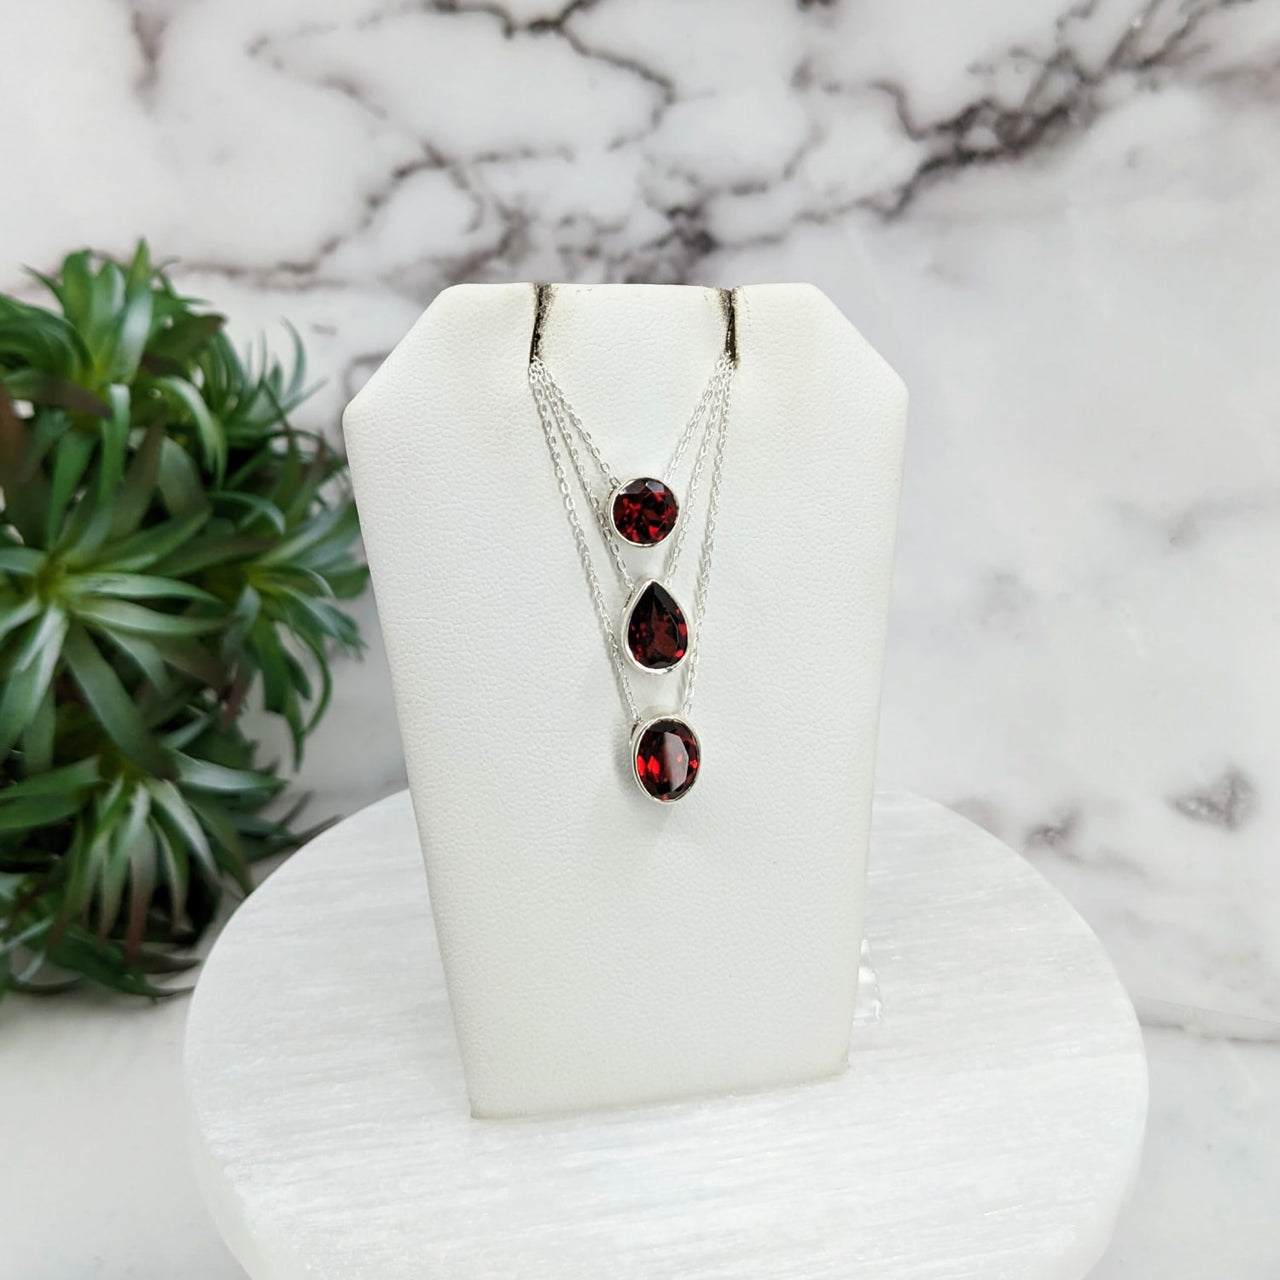 Garnet Faceted Necklace in Sterling Silver Slider Pendant on 18’ Chain #LV3250